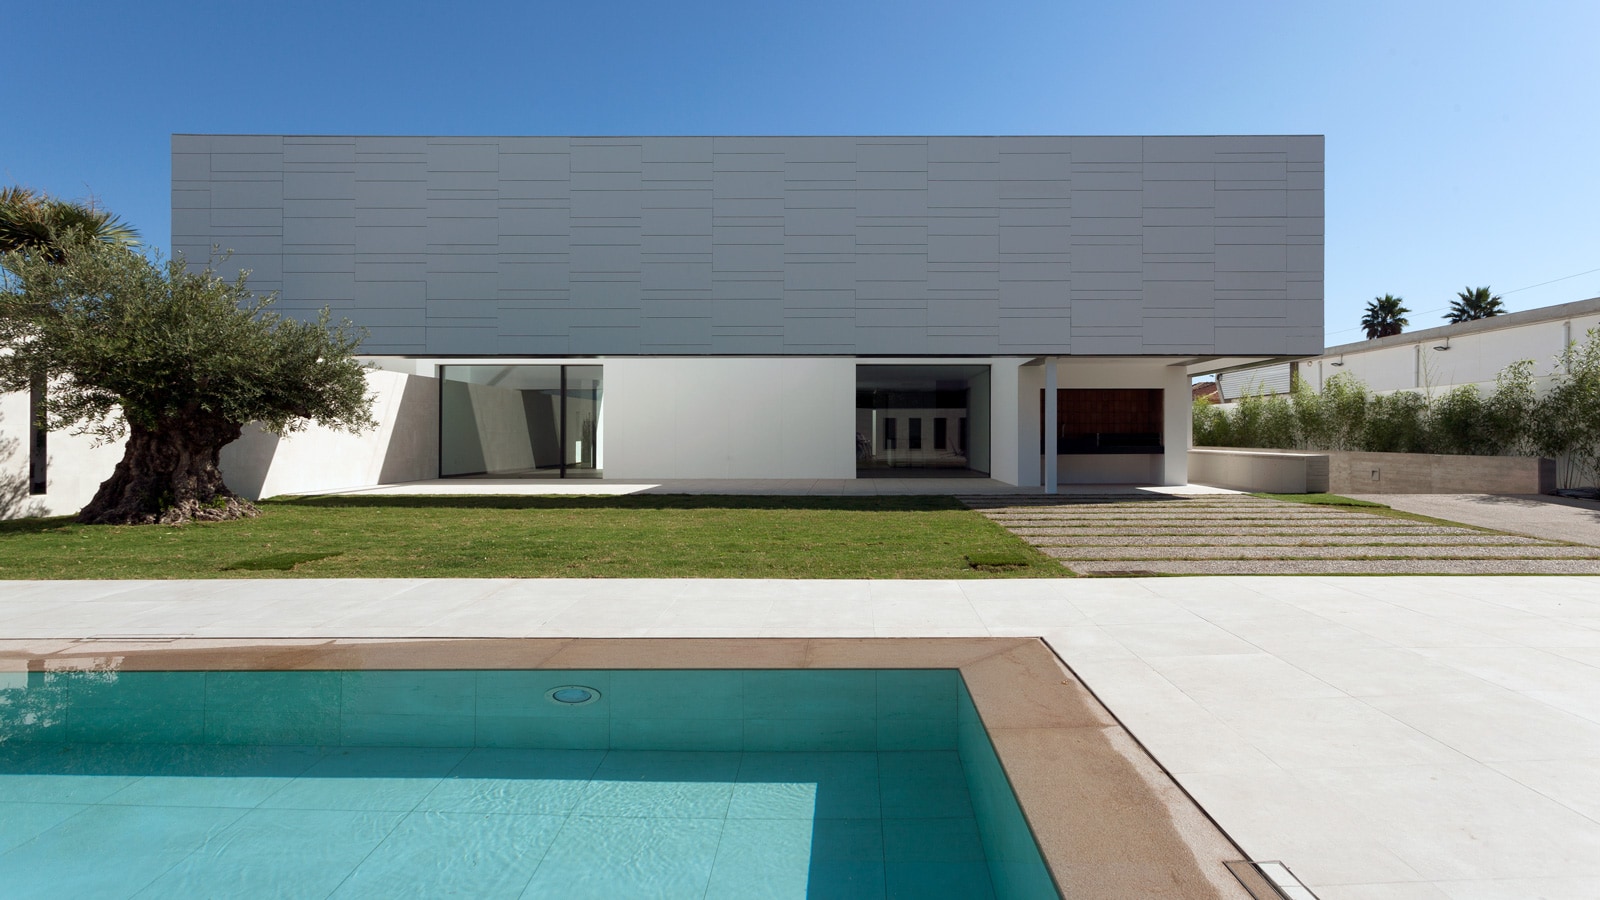 Santatecla Arquitectos defend the purity of geometry with Porcelanosa's collections in this Alicante home